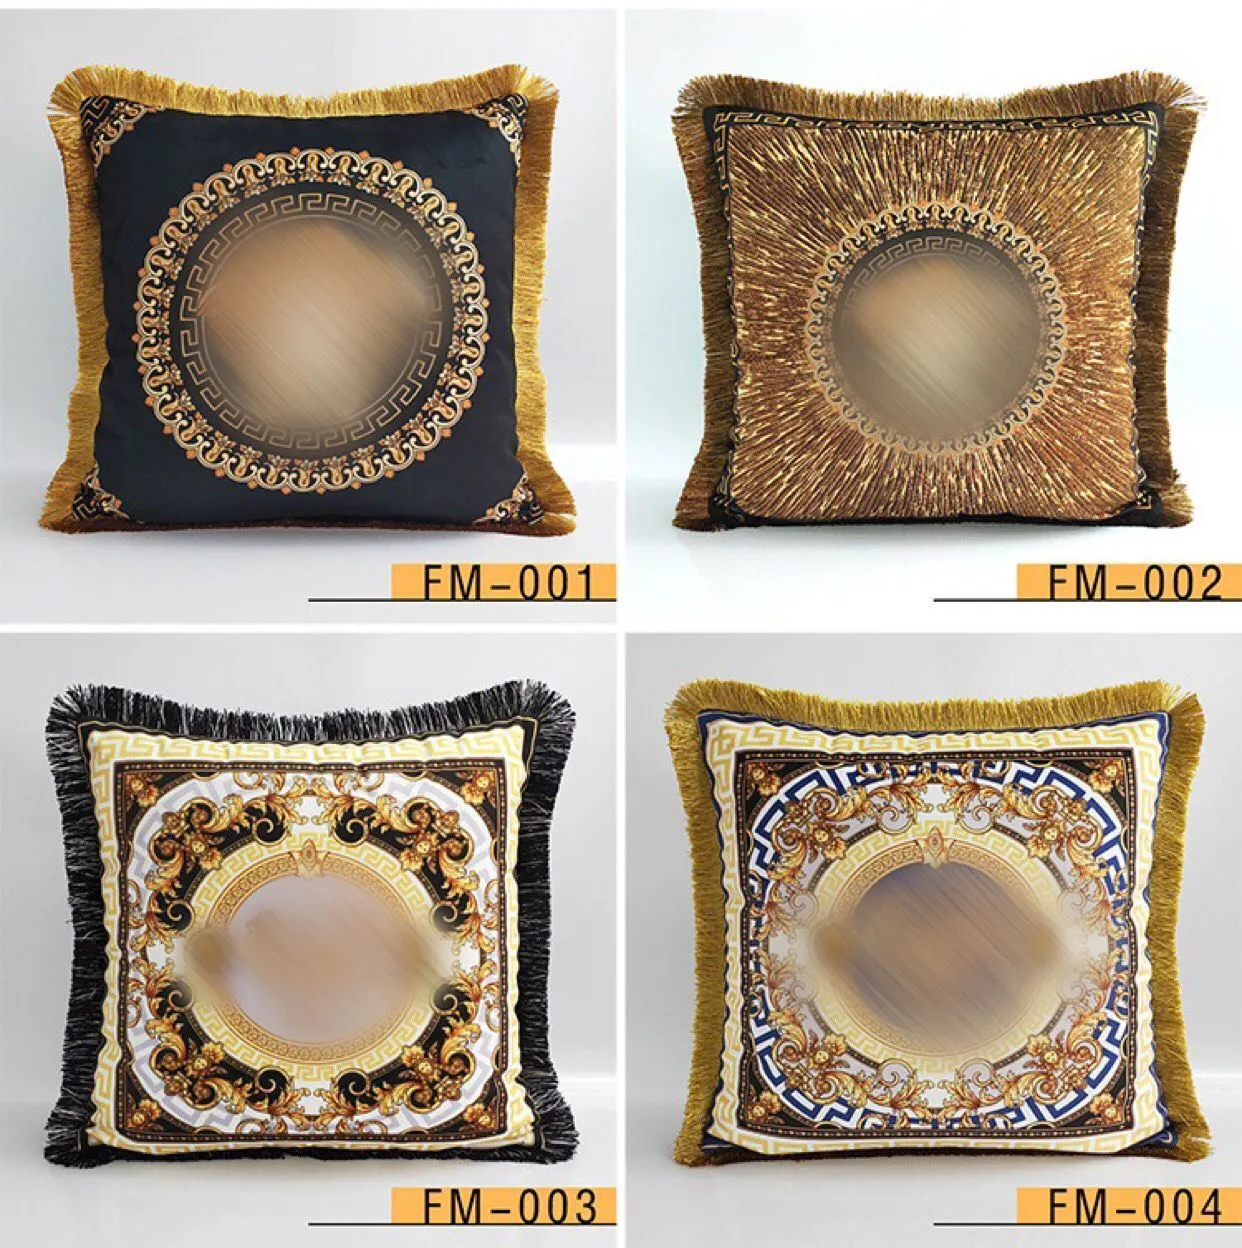 Luxury pillow case designer Signage tassel 20 Avatar patterns printting pillowcase cushion cover 45*45cm for 4 seasons home decorative and festival gift